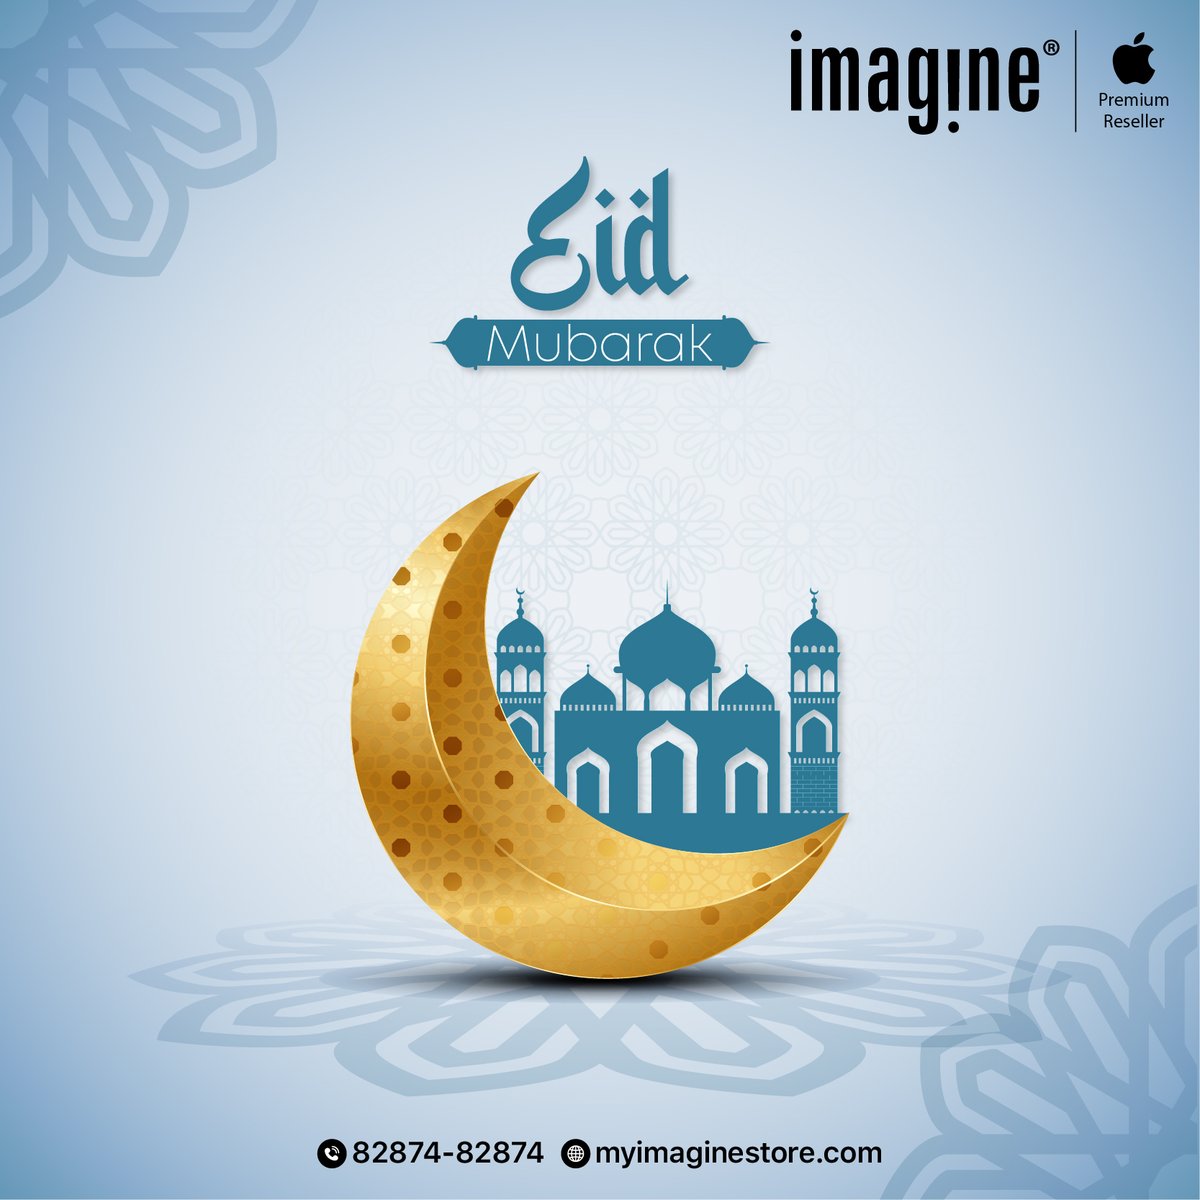 May this Eid bring you endless blessings, happiness, and success in all your endeavors. Eid Mubarak from @ImagineApplePR! #Apple #Tresor #Imagine #EidMubarak #EidWishes #Happiness #Success